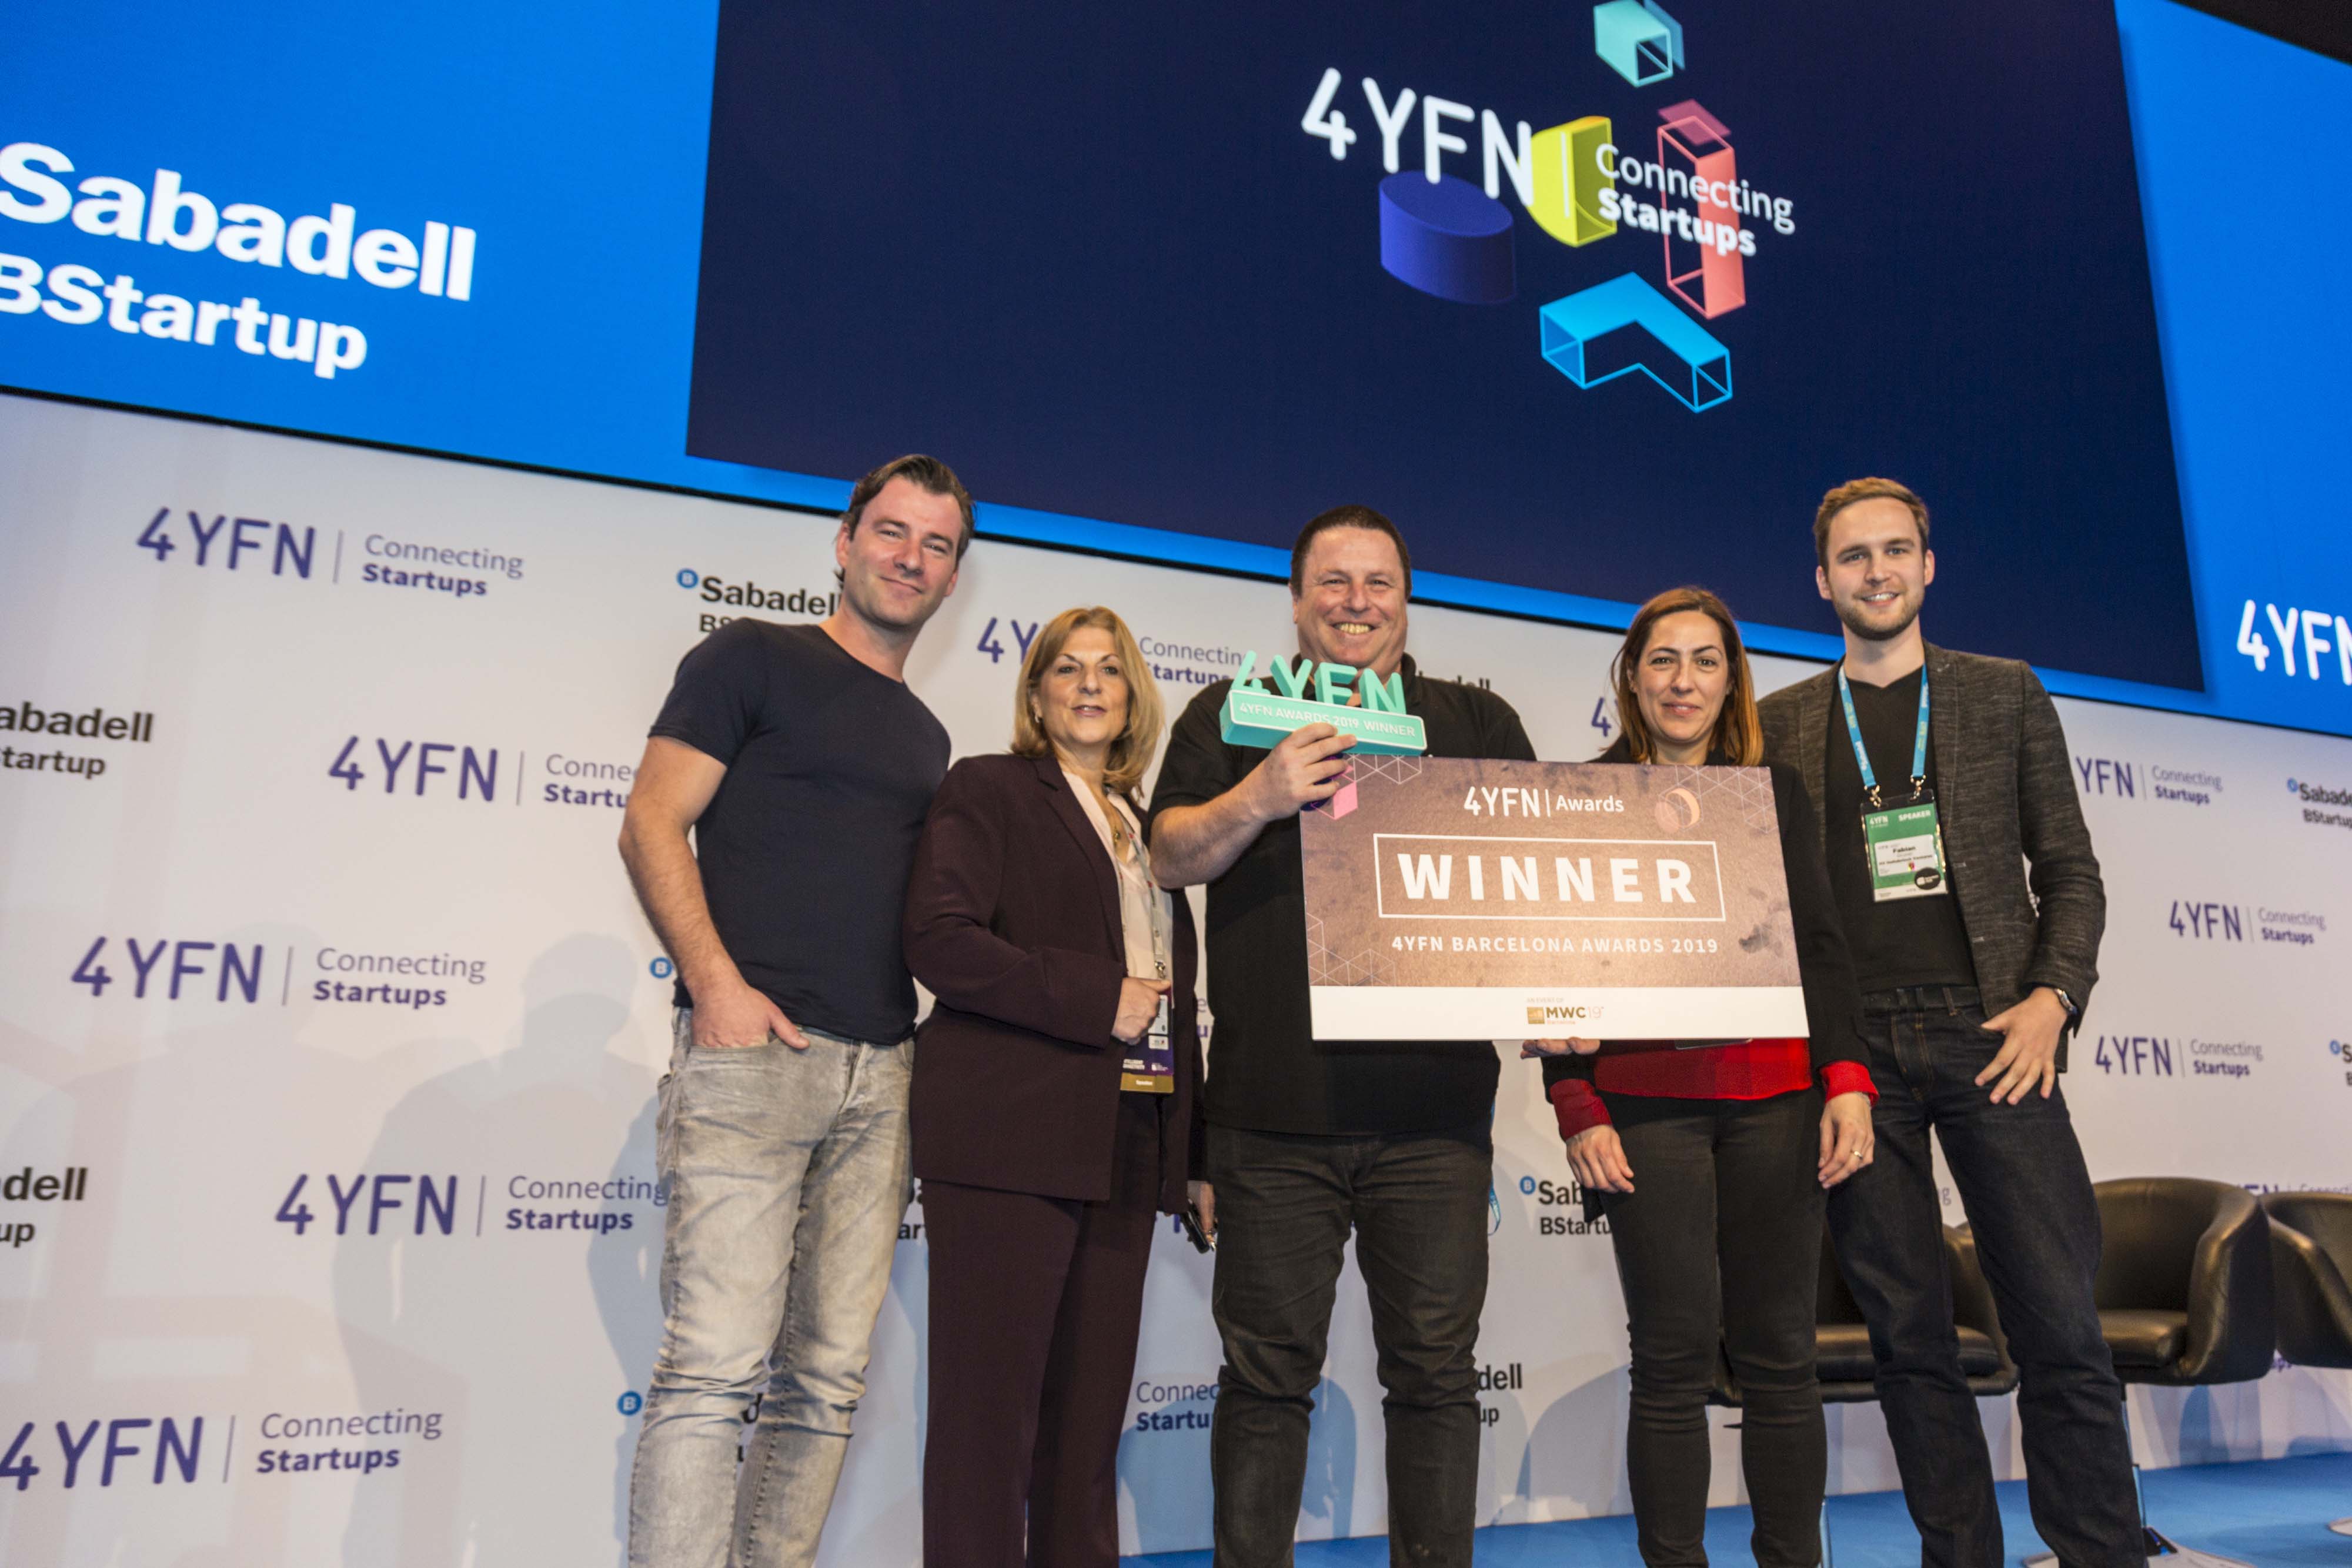 jammer gun purchases crossword - IoT Device Security Startup NanoLock Wins GSMA’s 4YFN Competition